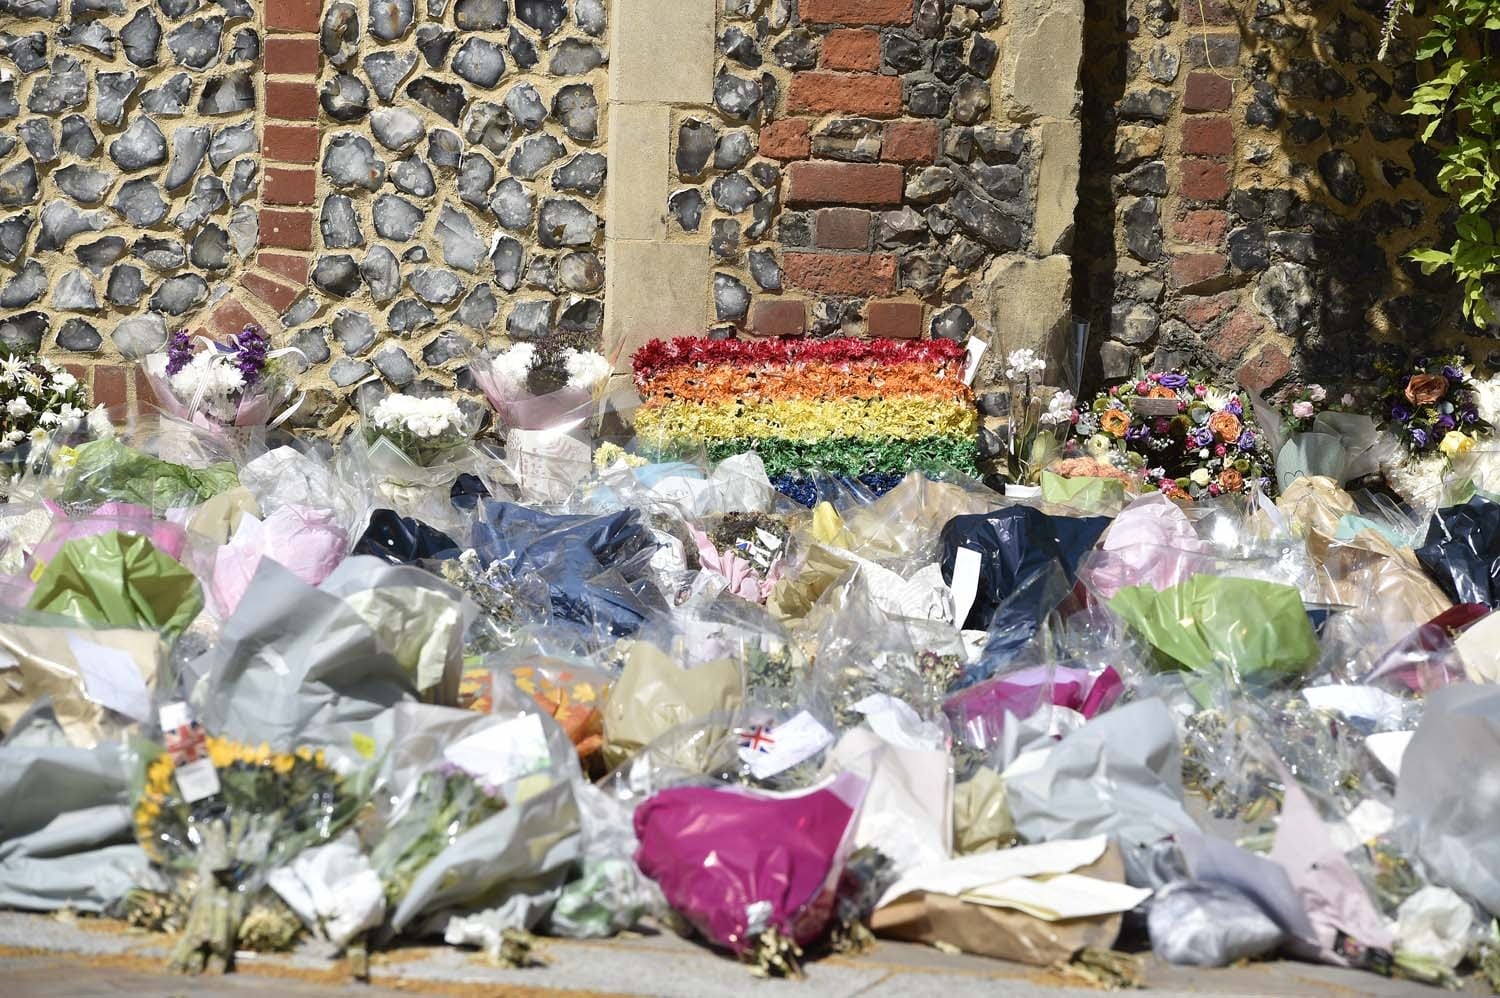 The city's LGBT+ community was devastated by the news that three of its own had been murdered in the attack